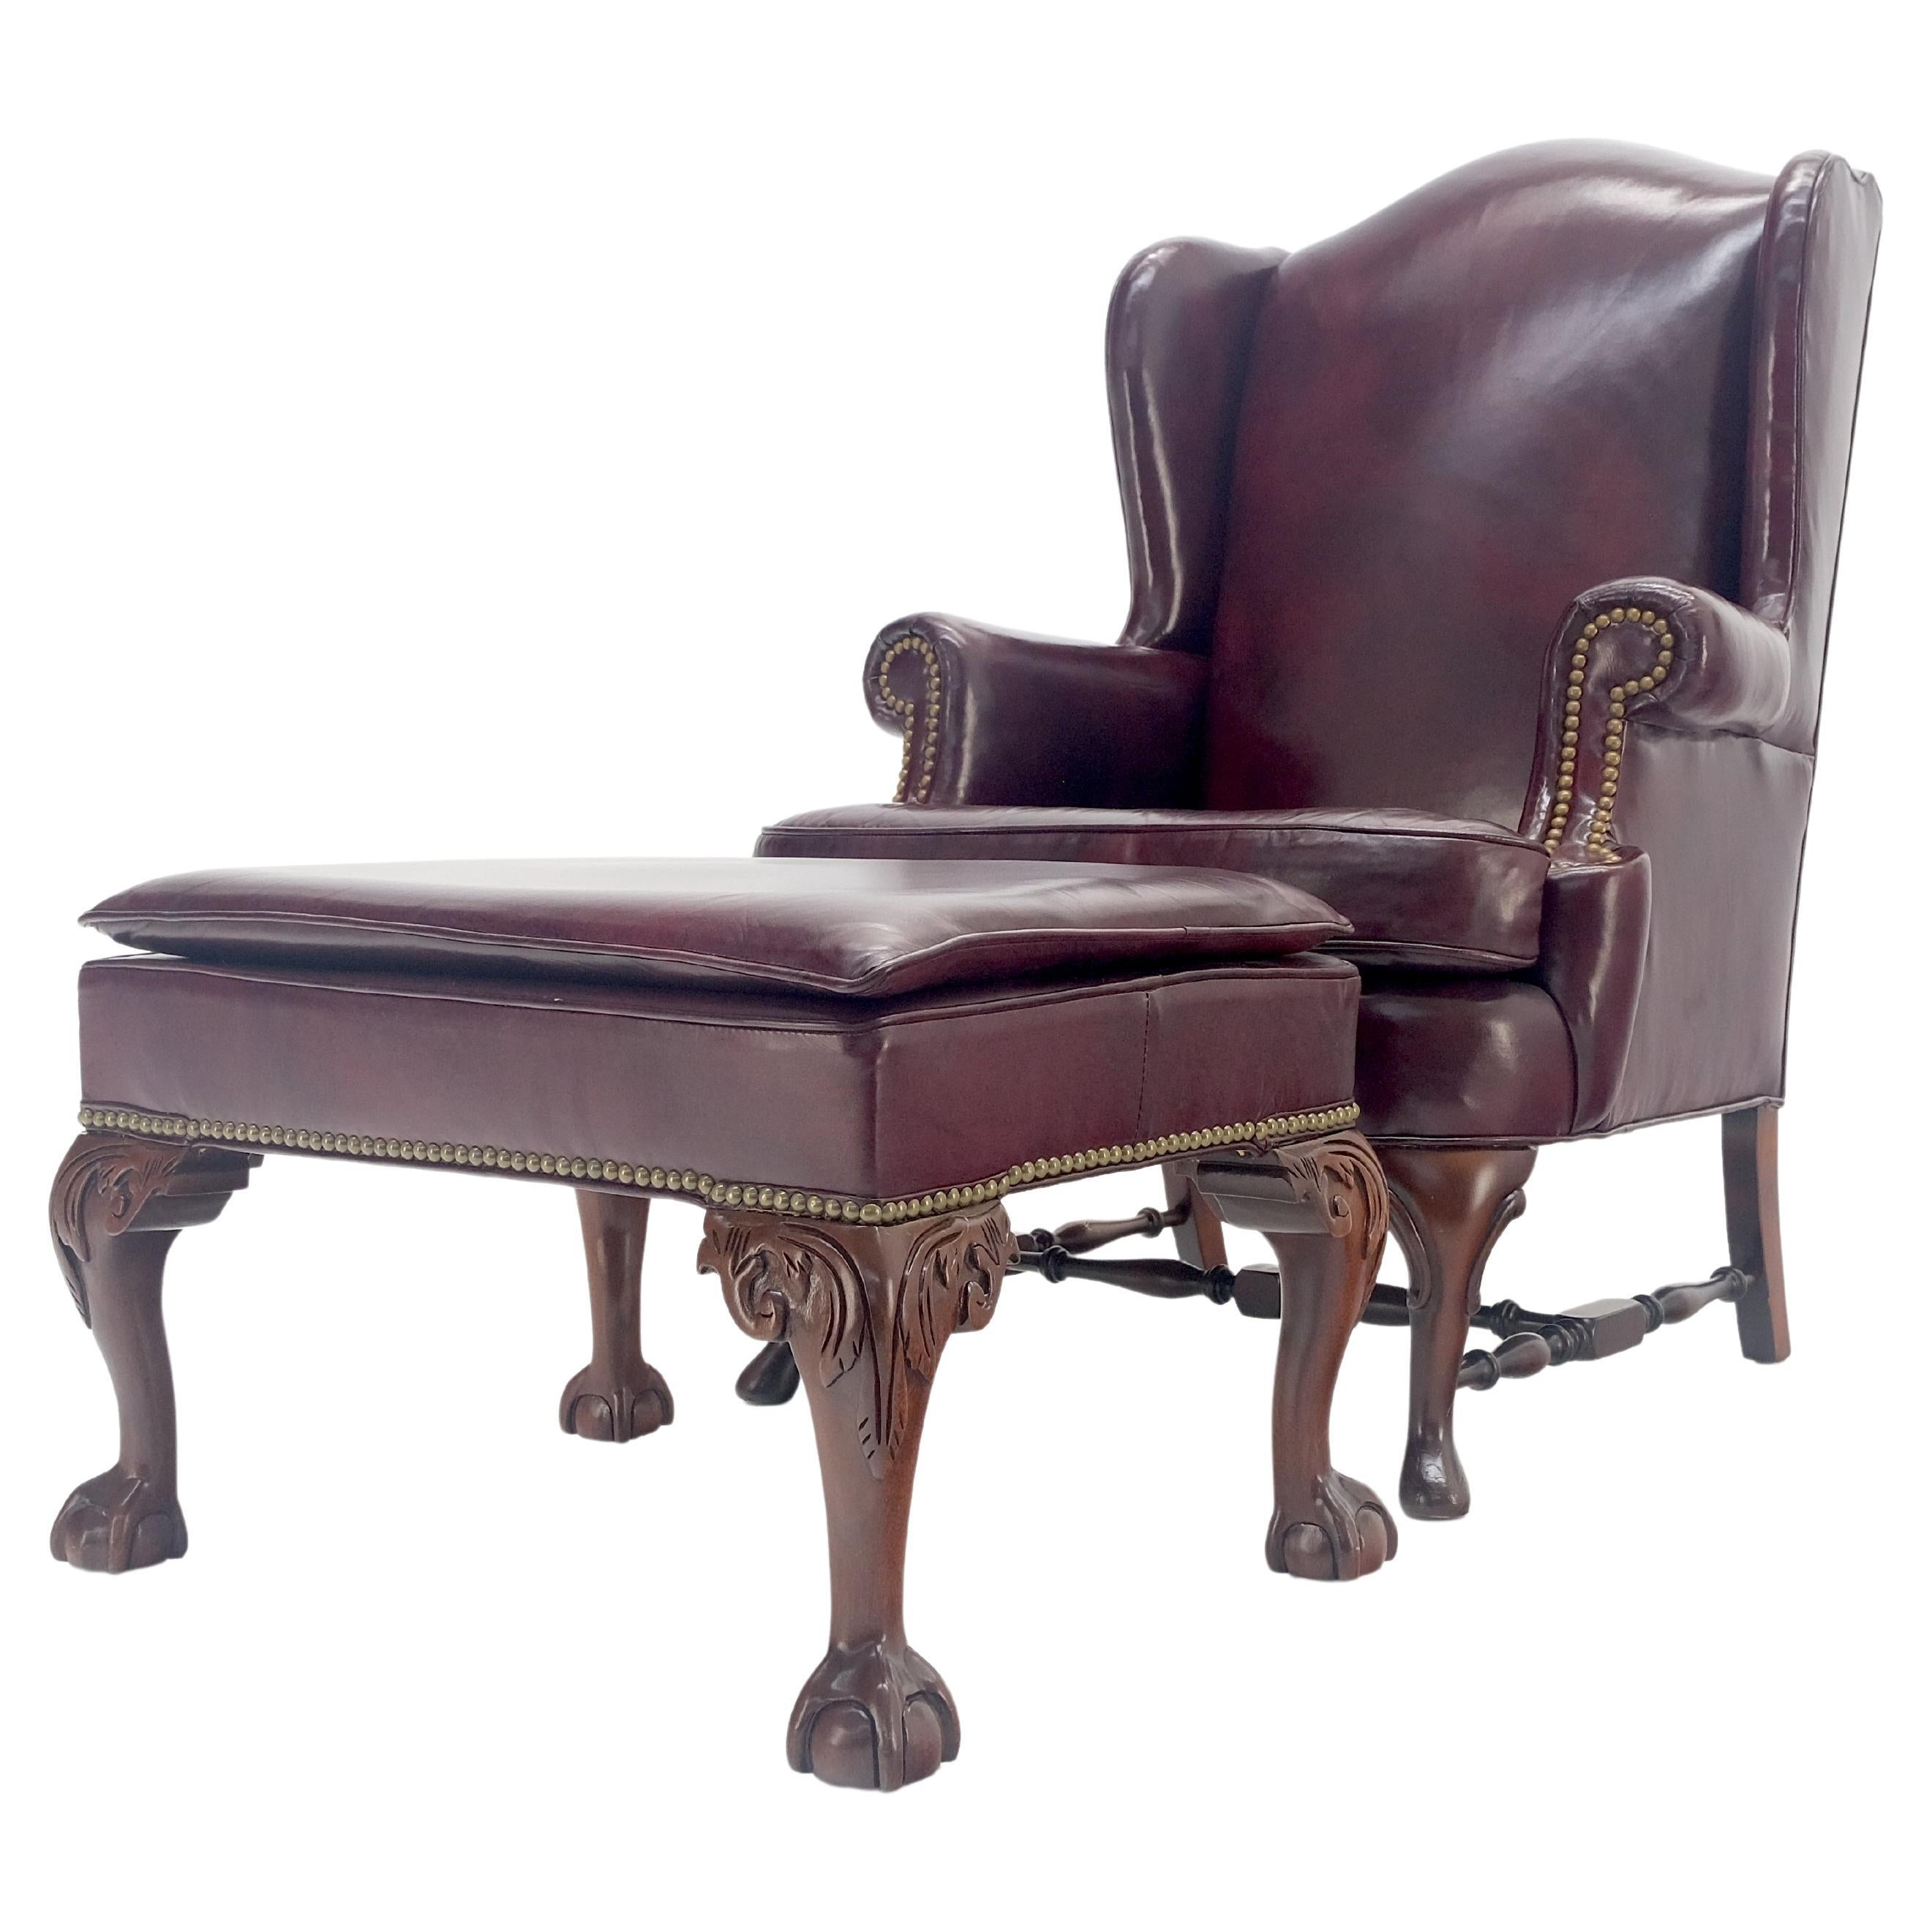 Kindel Burgundy Leather Upholstery Carved Mahogany Legs Wingback Chair & Ottoman en vente